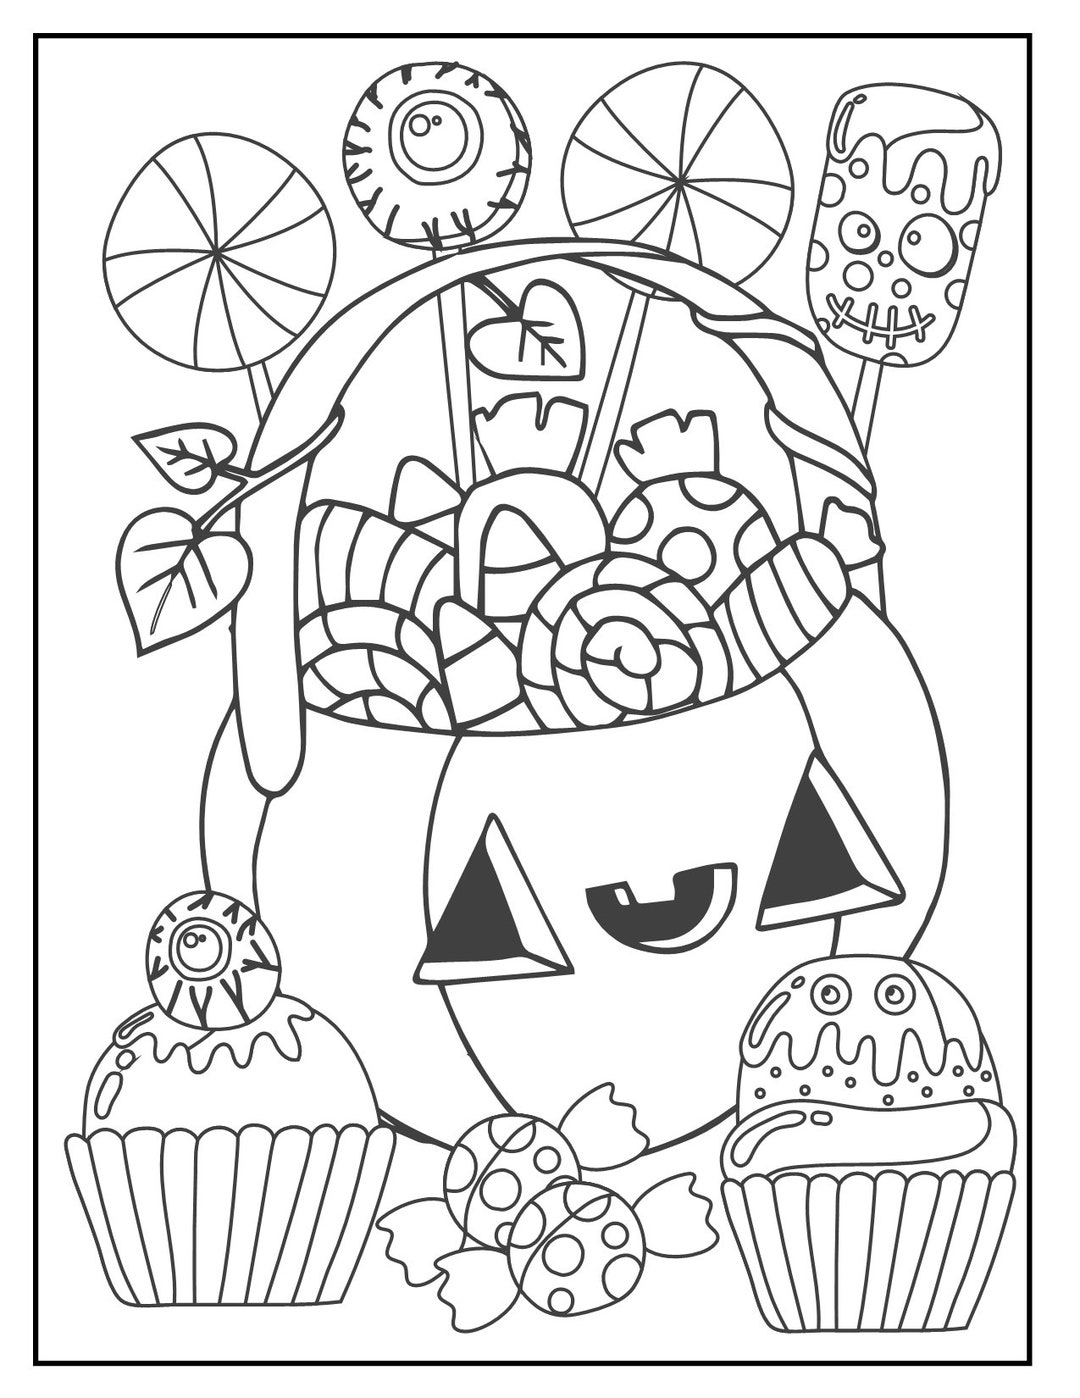 40 Kids Halloween Coloring Pages - Etsy